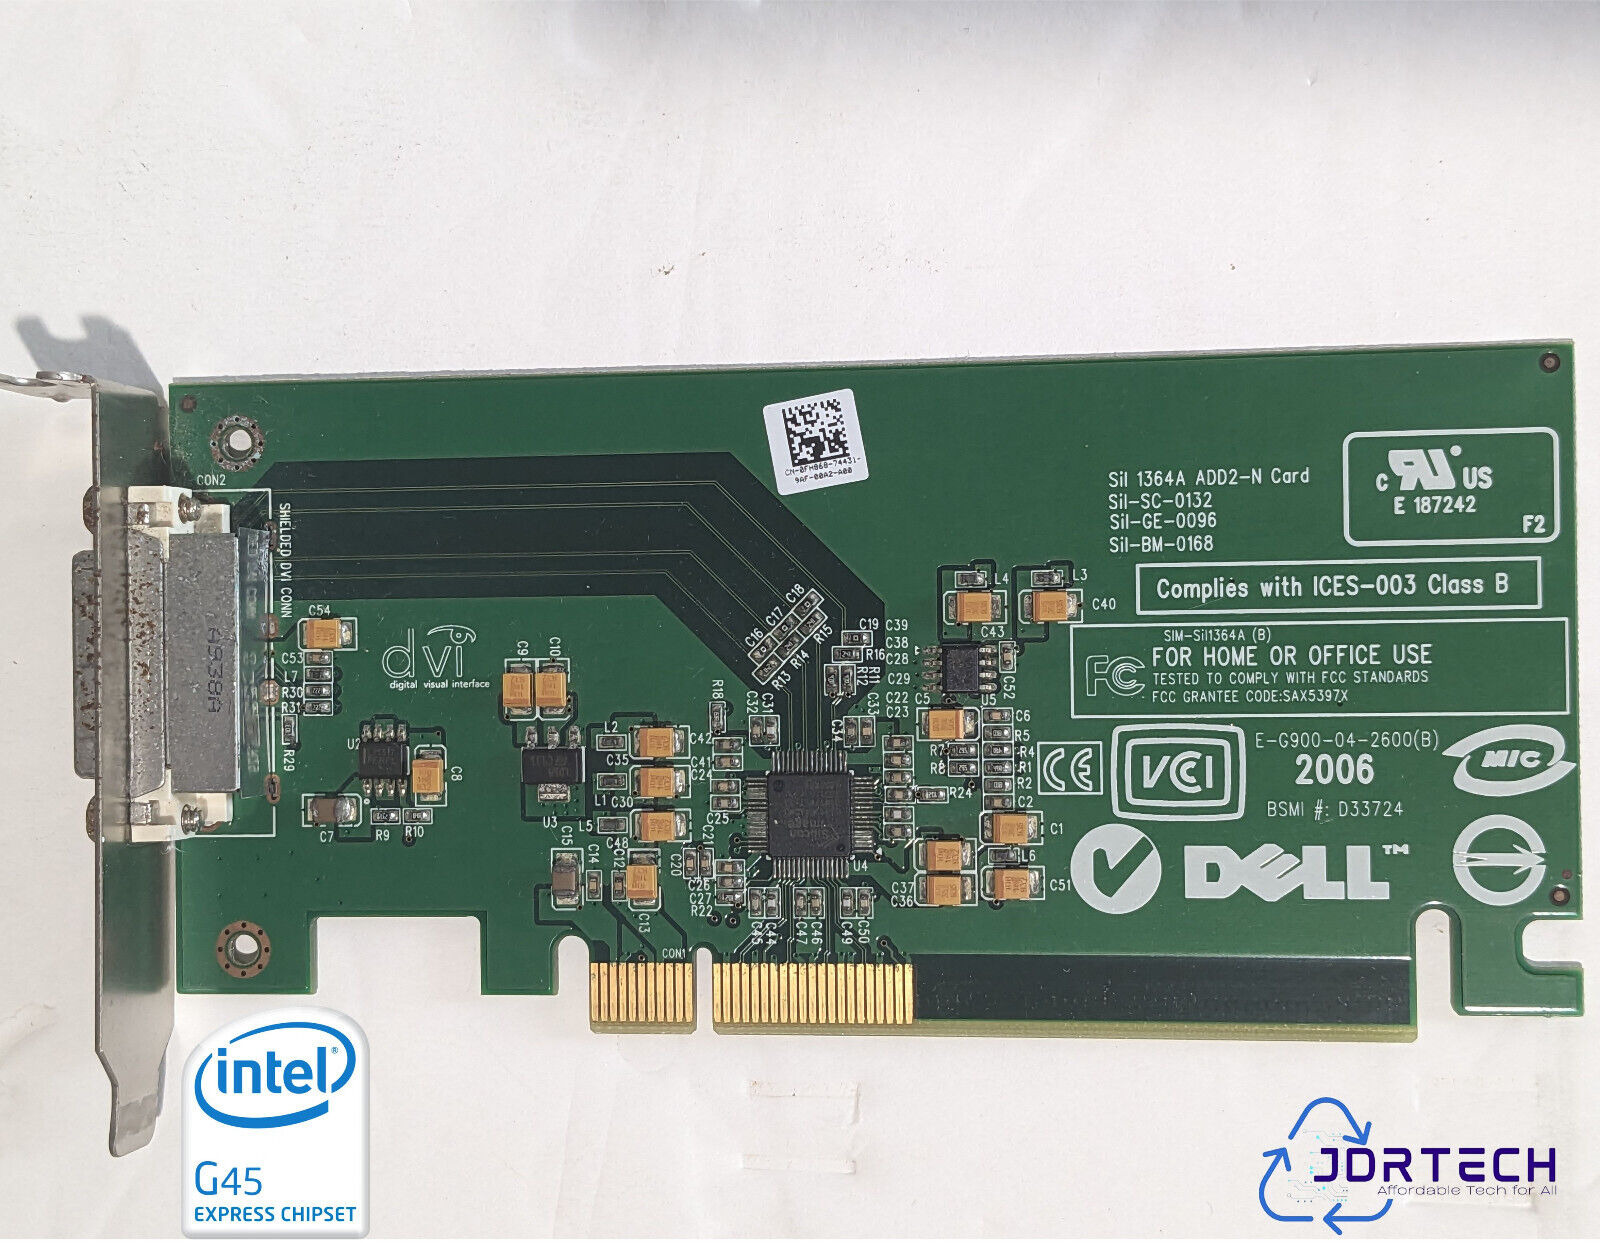 Dell Sil 1364A (FH868) Add-on ADD2 DVI PCIe Card Works only with G45 Chipset